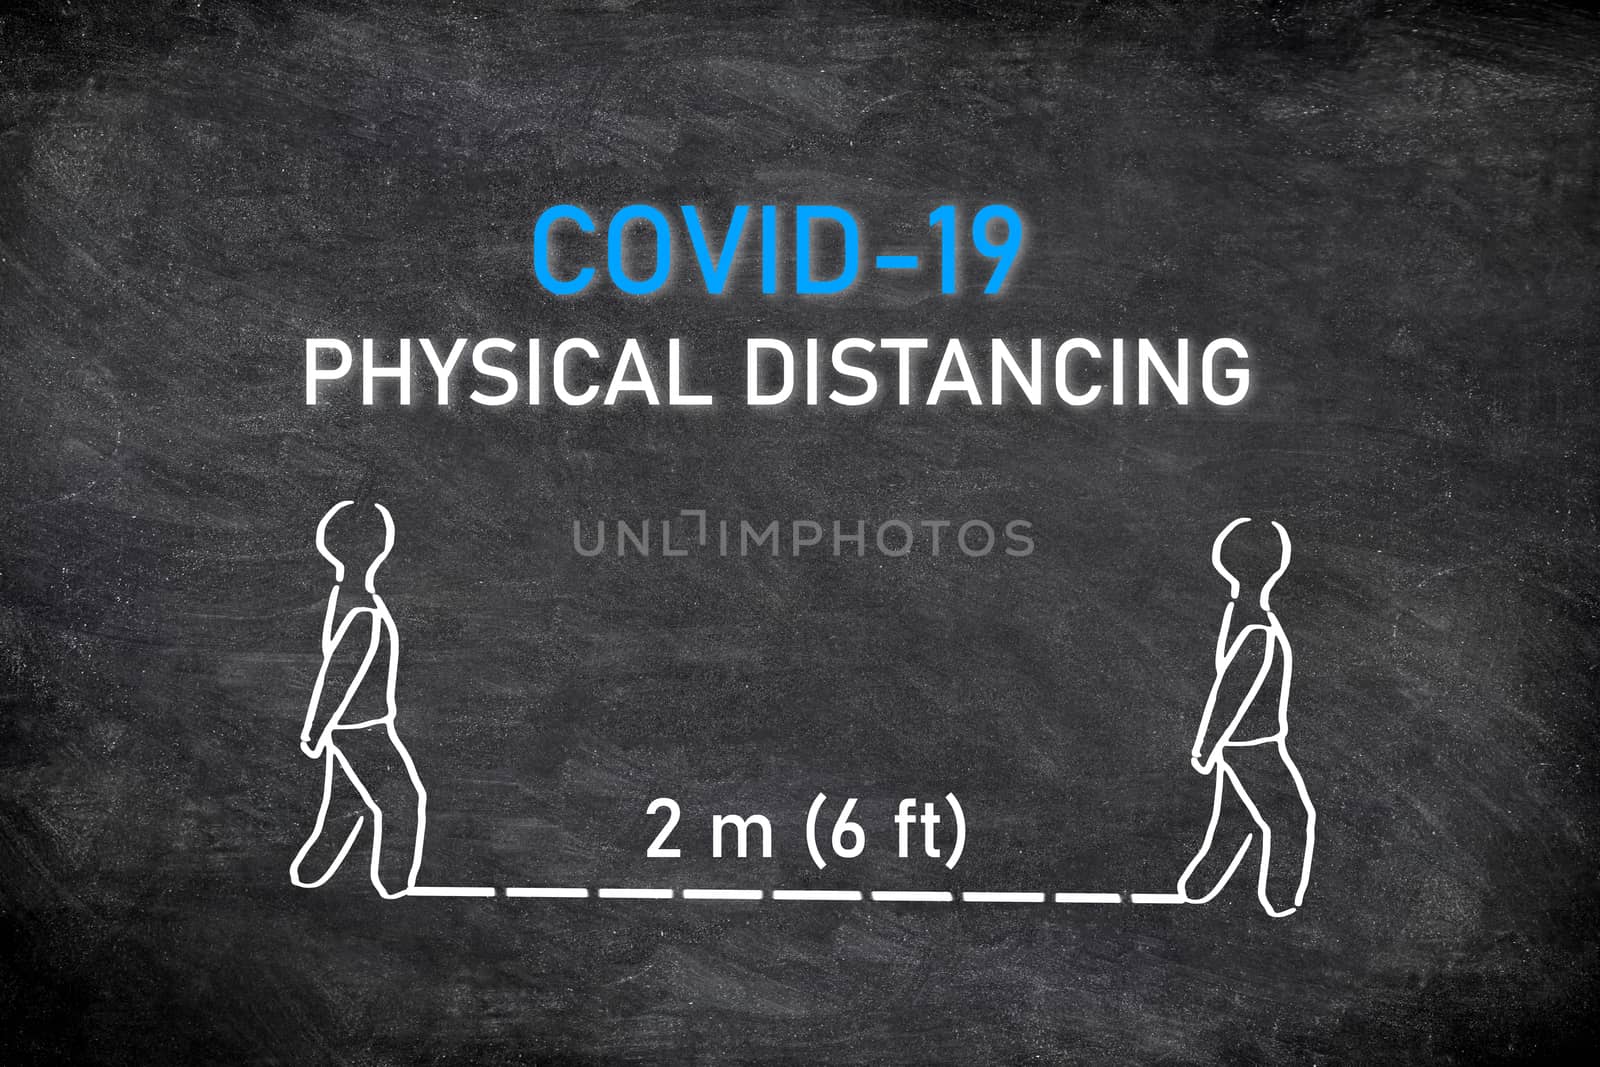 COVID-19 PHYSICAL DISTANCING instruction blackboard illustration. Maintain a distance of two meters or 6 feet between each person waiting in line at store or hospital by Maridav